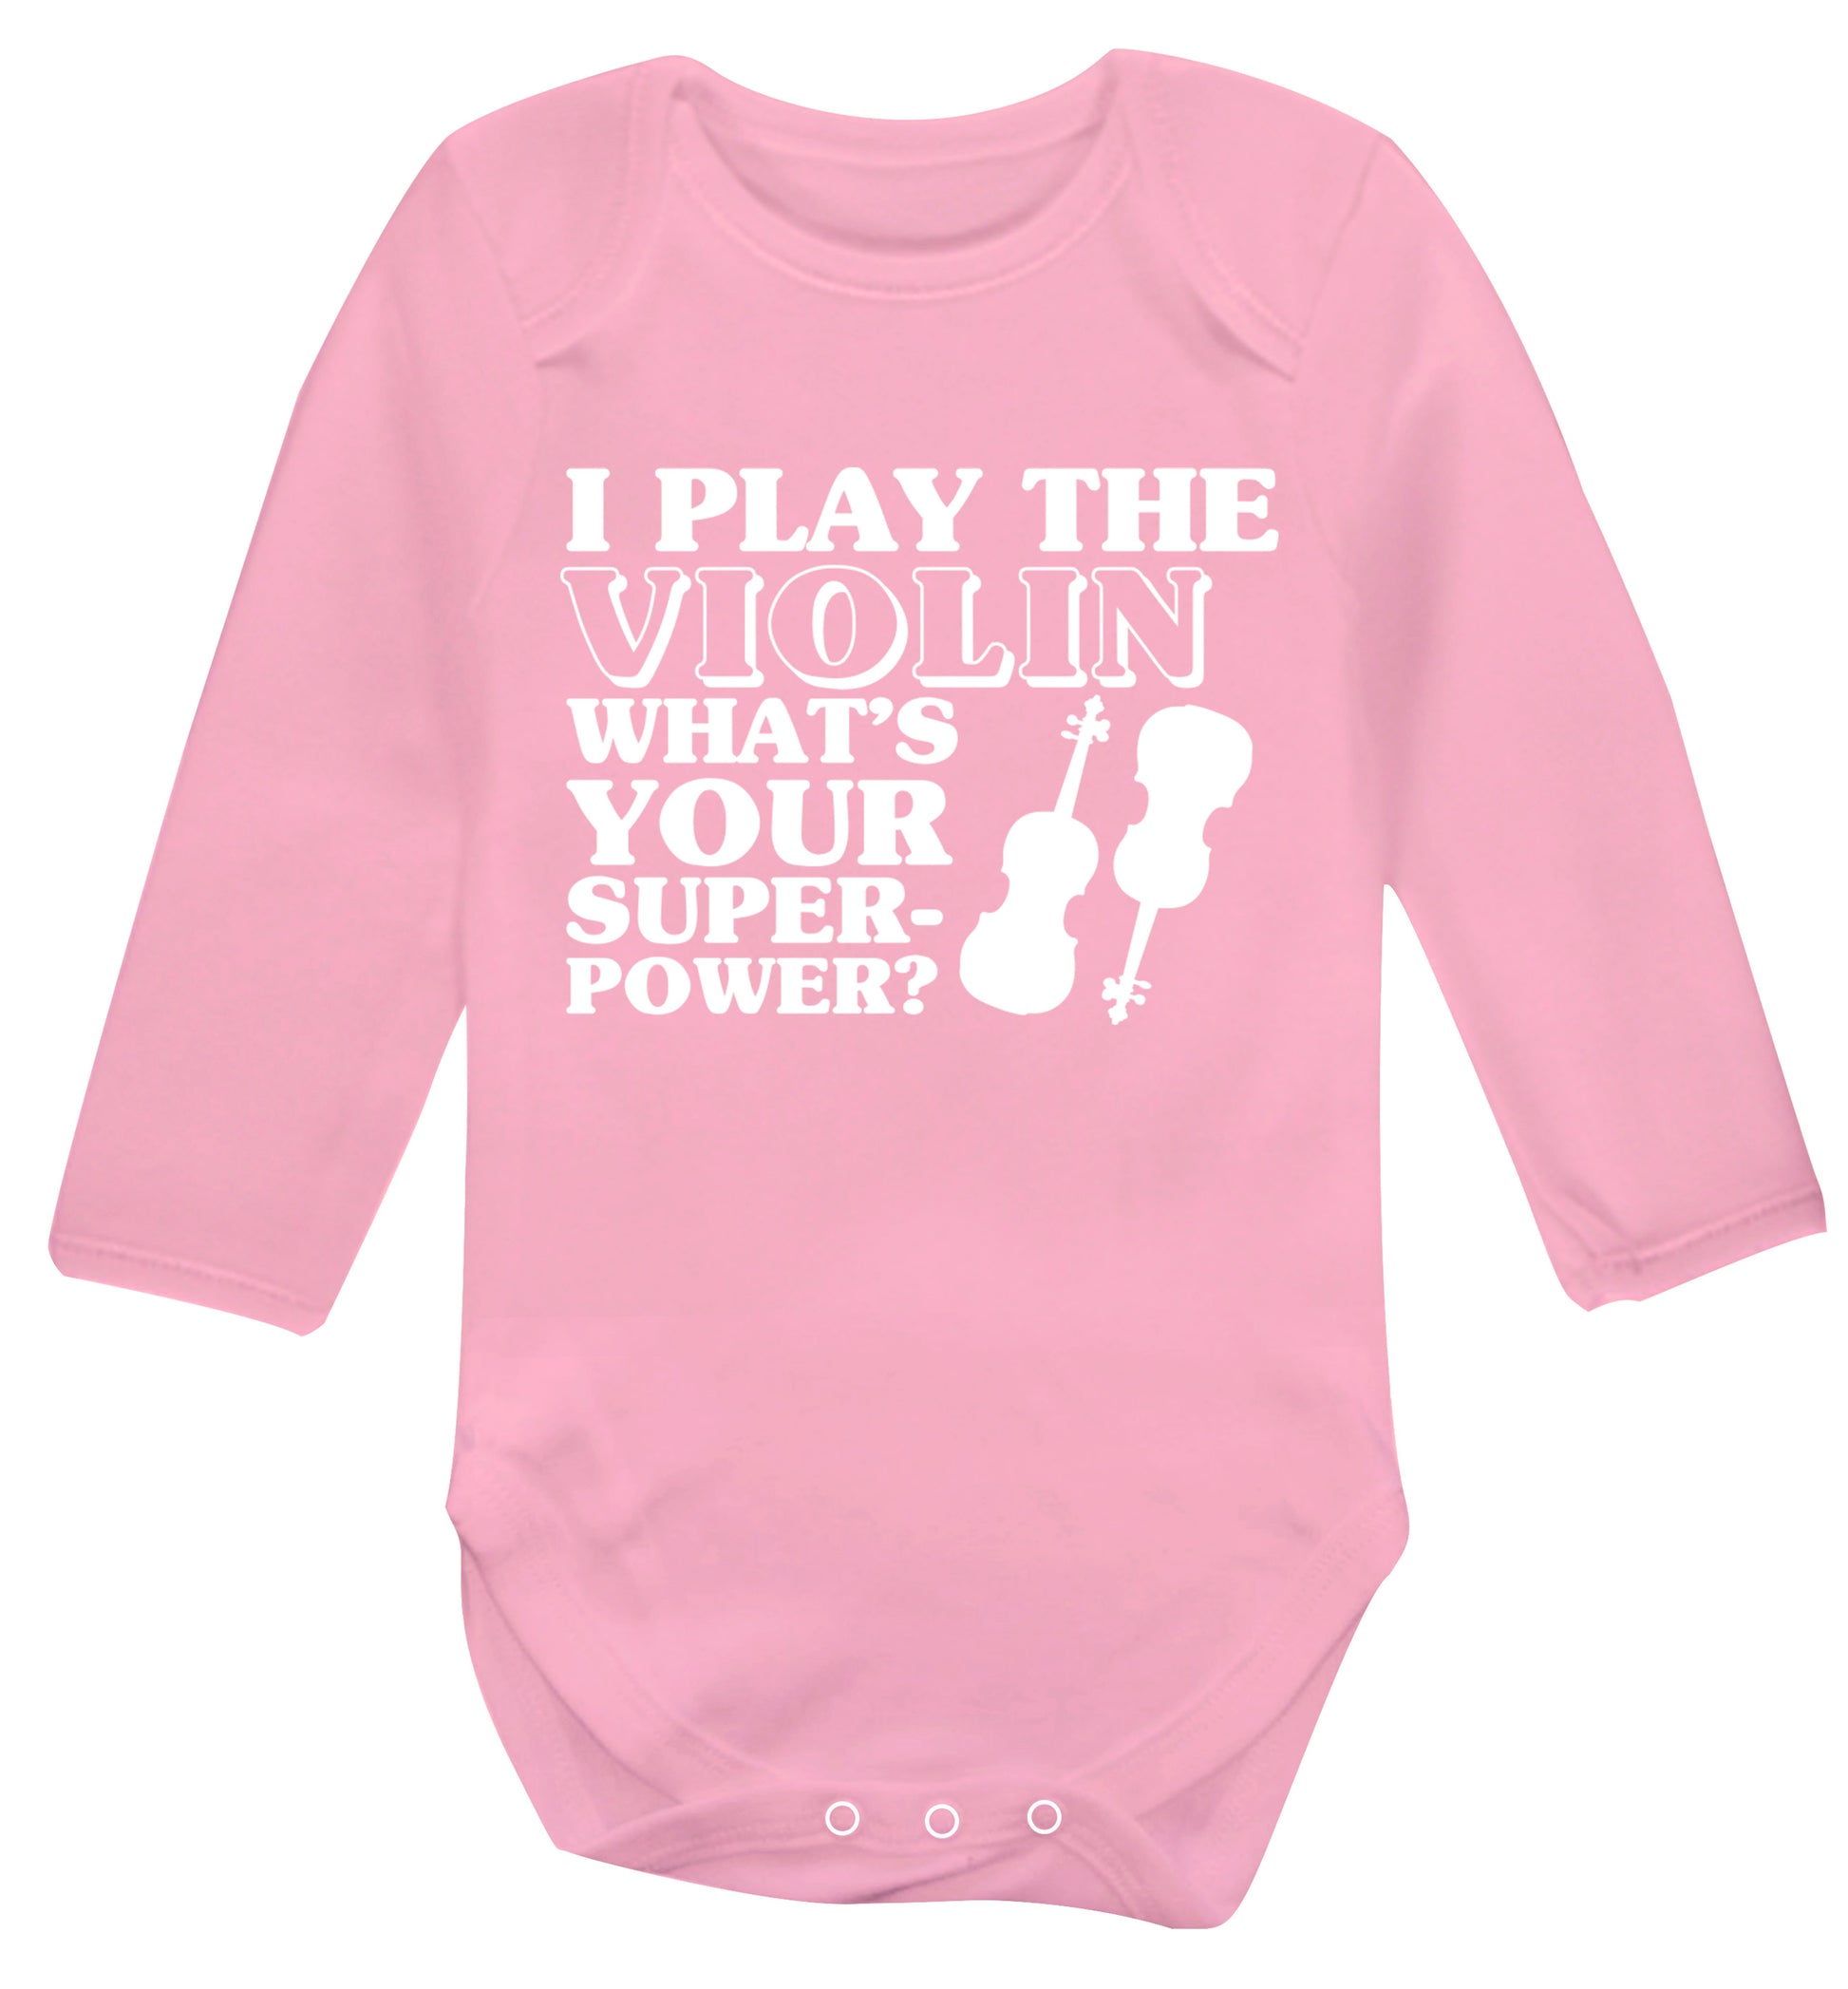 I Play Violin What's Your Superpower? Baby Vest long sleeved pale pink 6-12 months